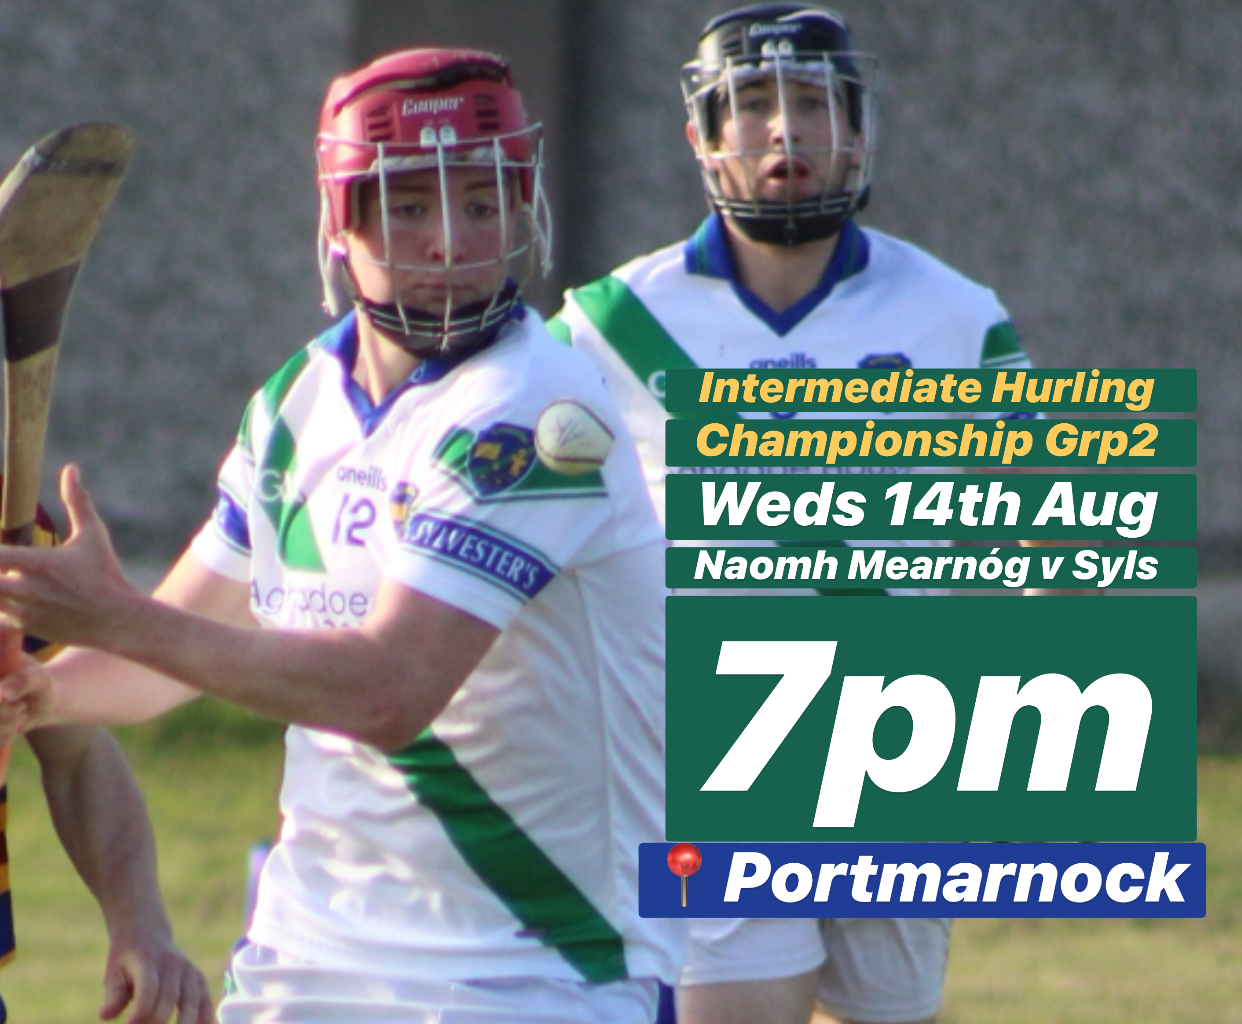 Inter Hurling Championship This Wednesday 14th August